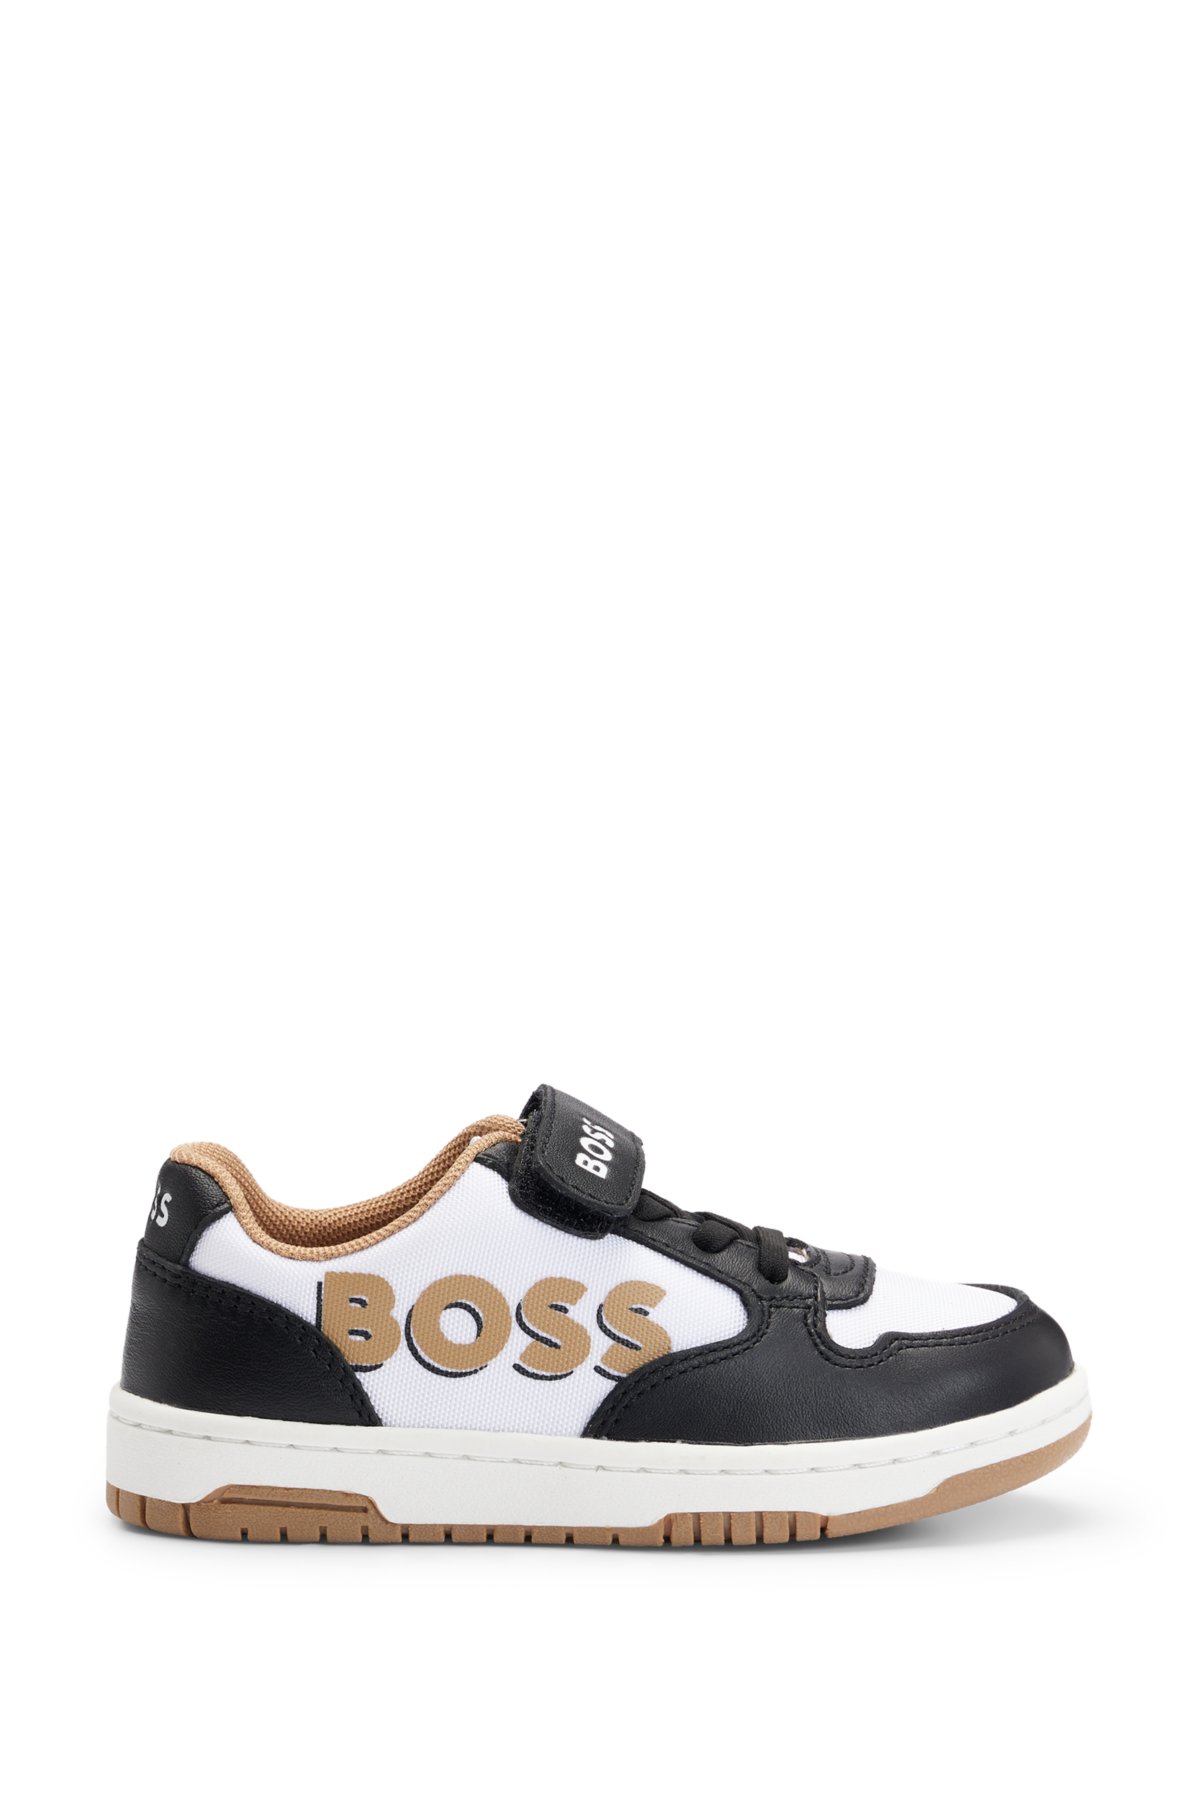 Kids' trainers in canvas and leather with branded strap, Black